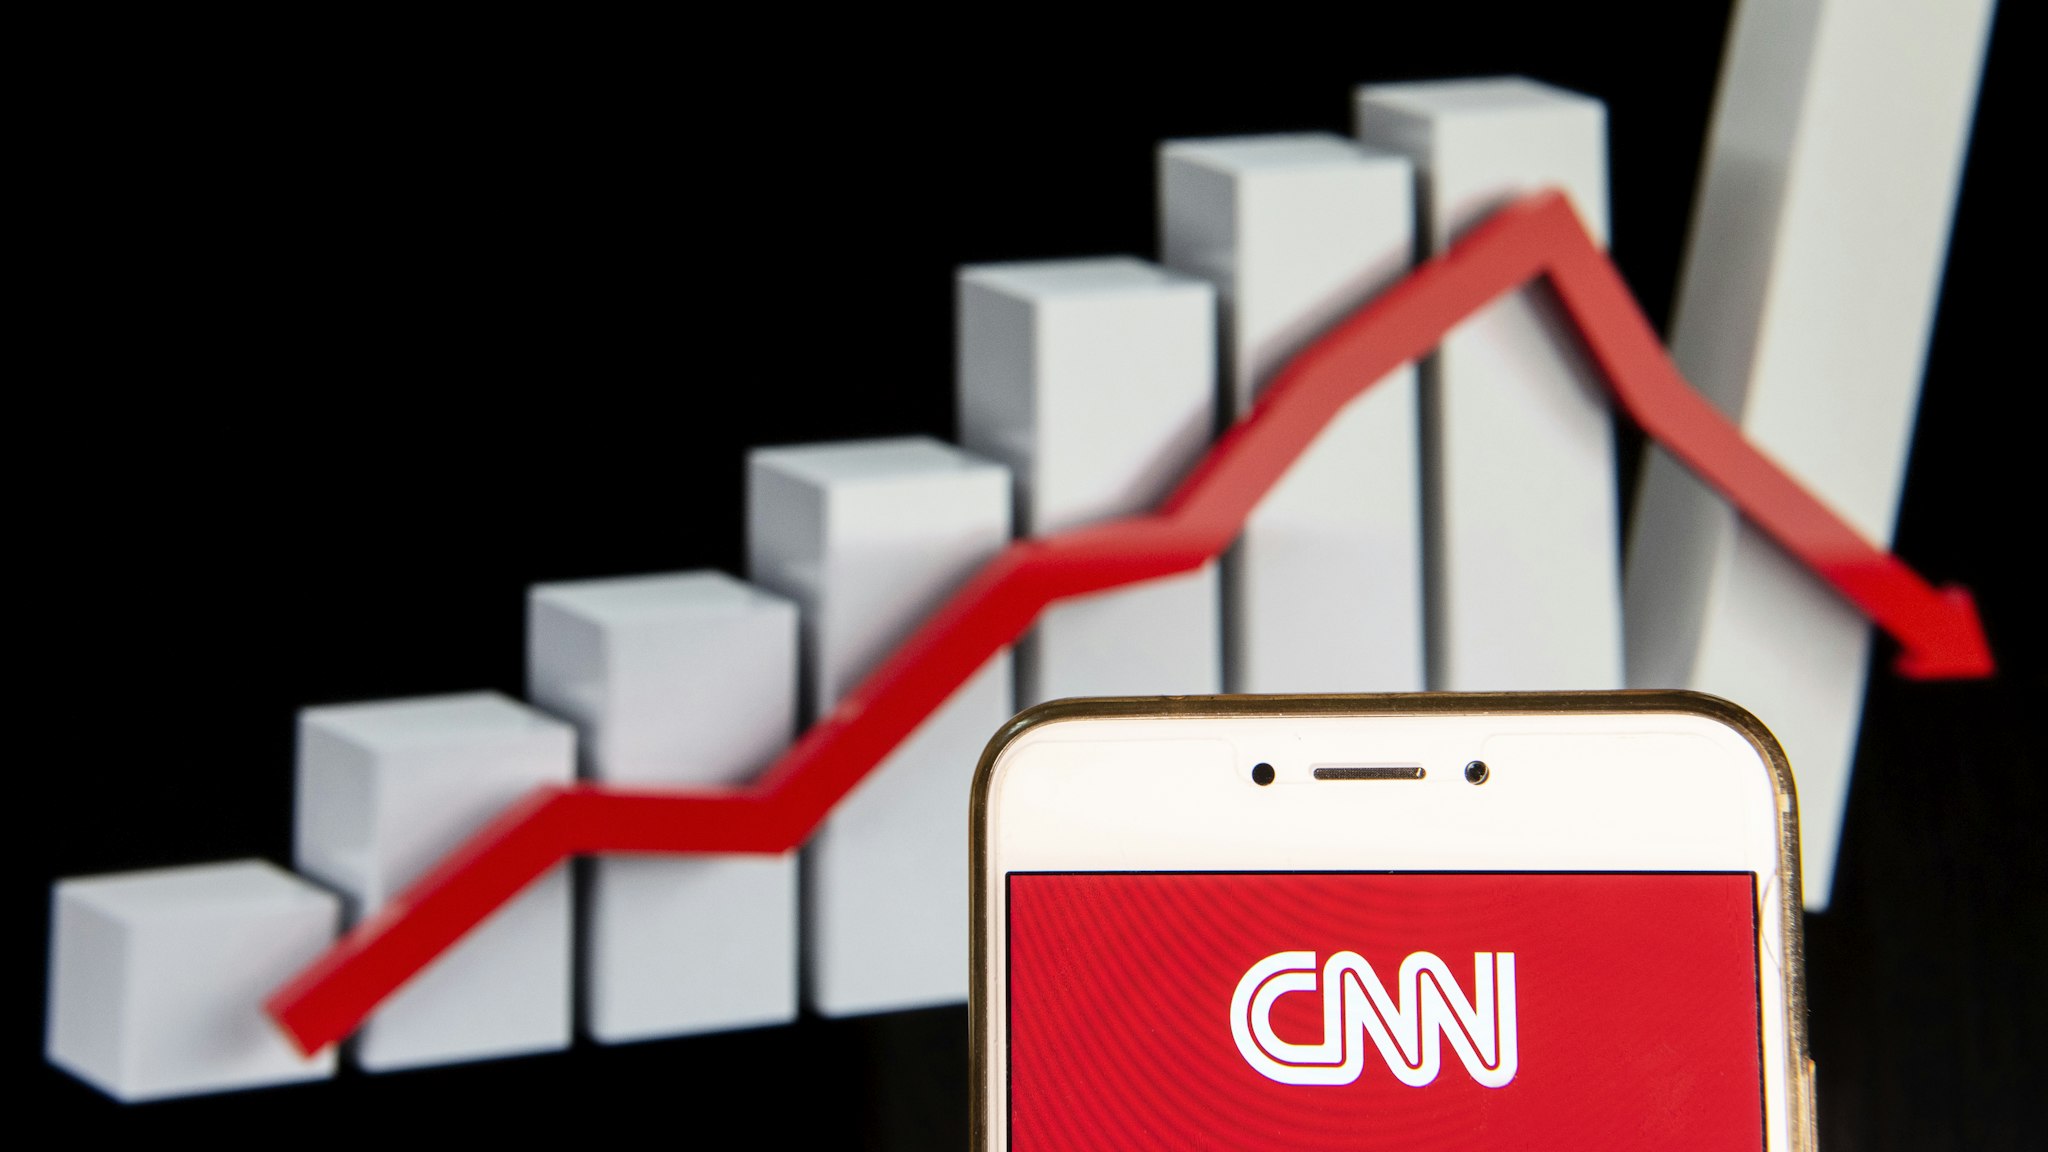 In this photo illustration, the CNN logo is seen displayed on an Android mobile device with a decline loses graph in the background.